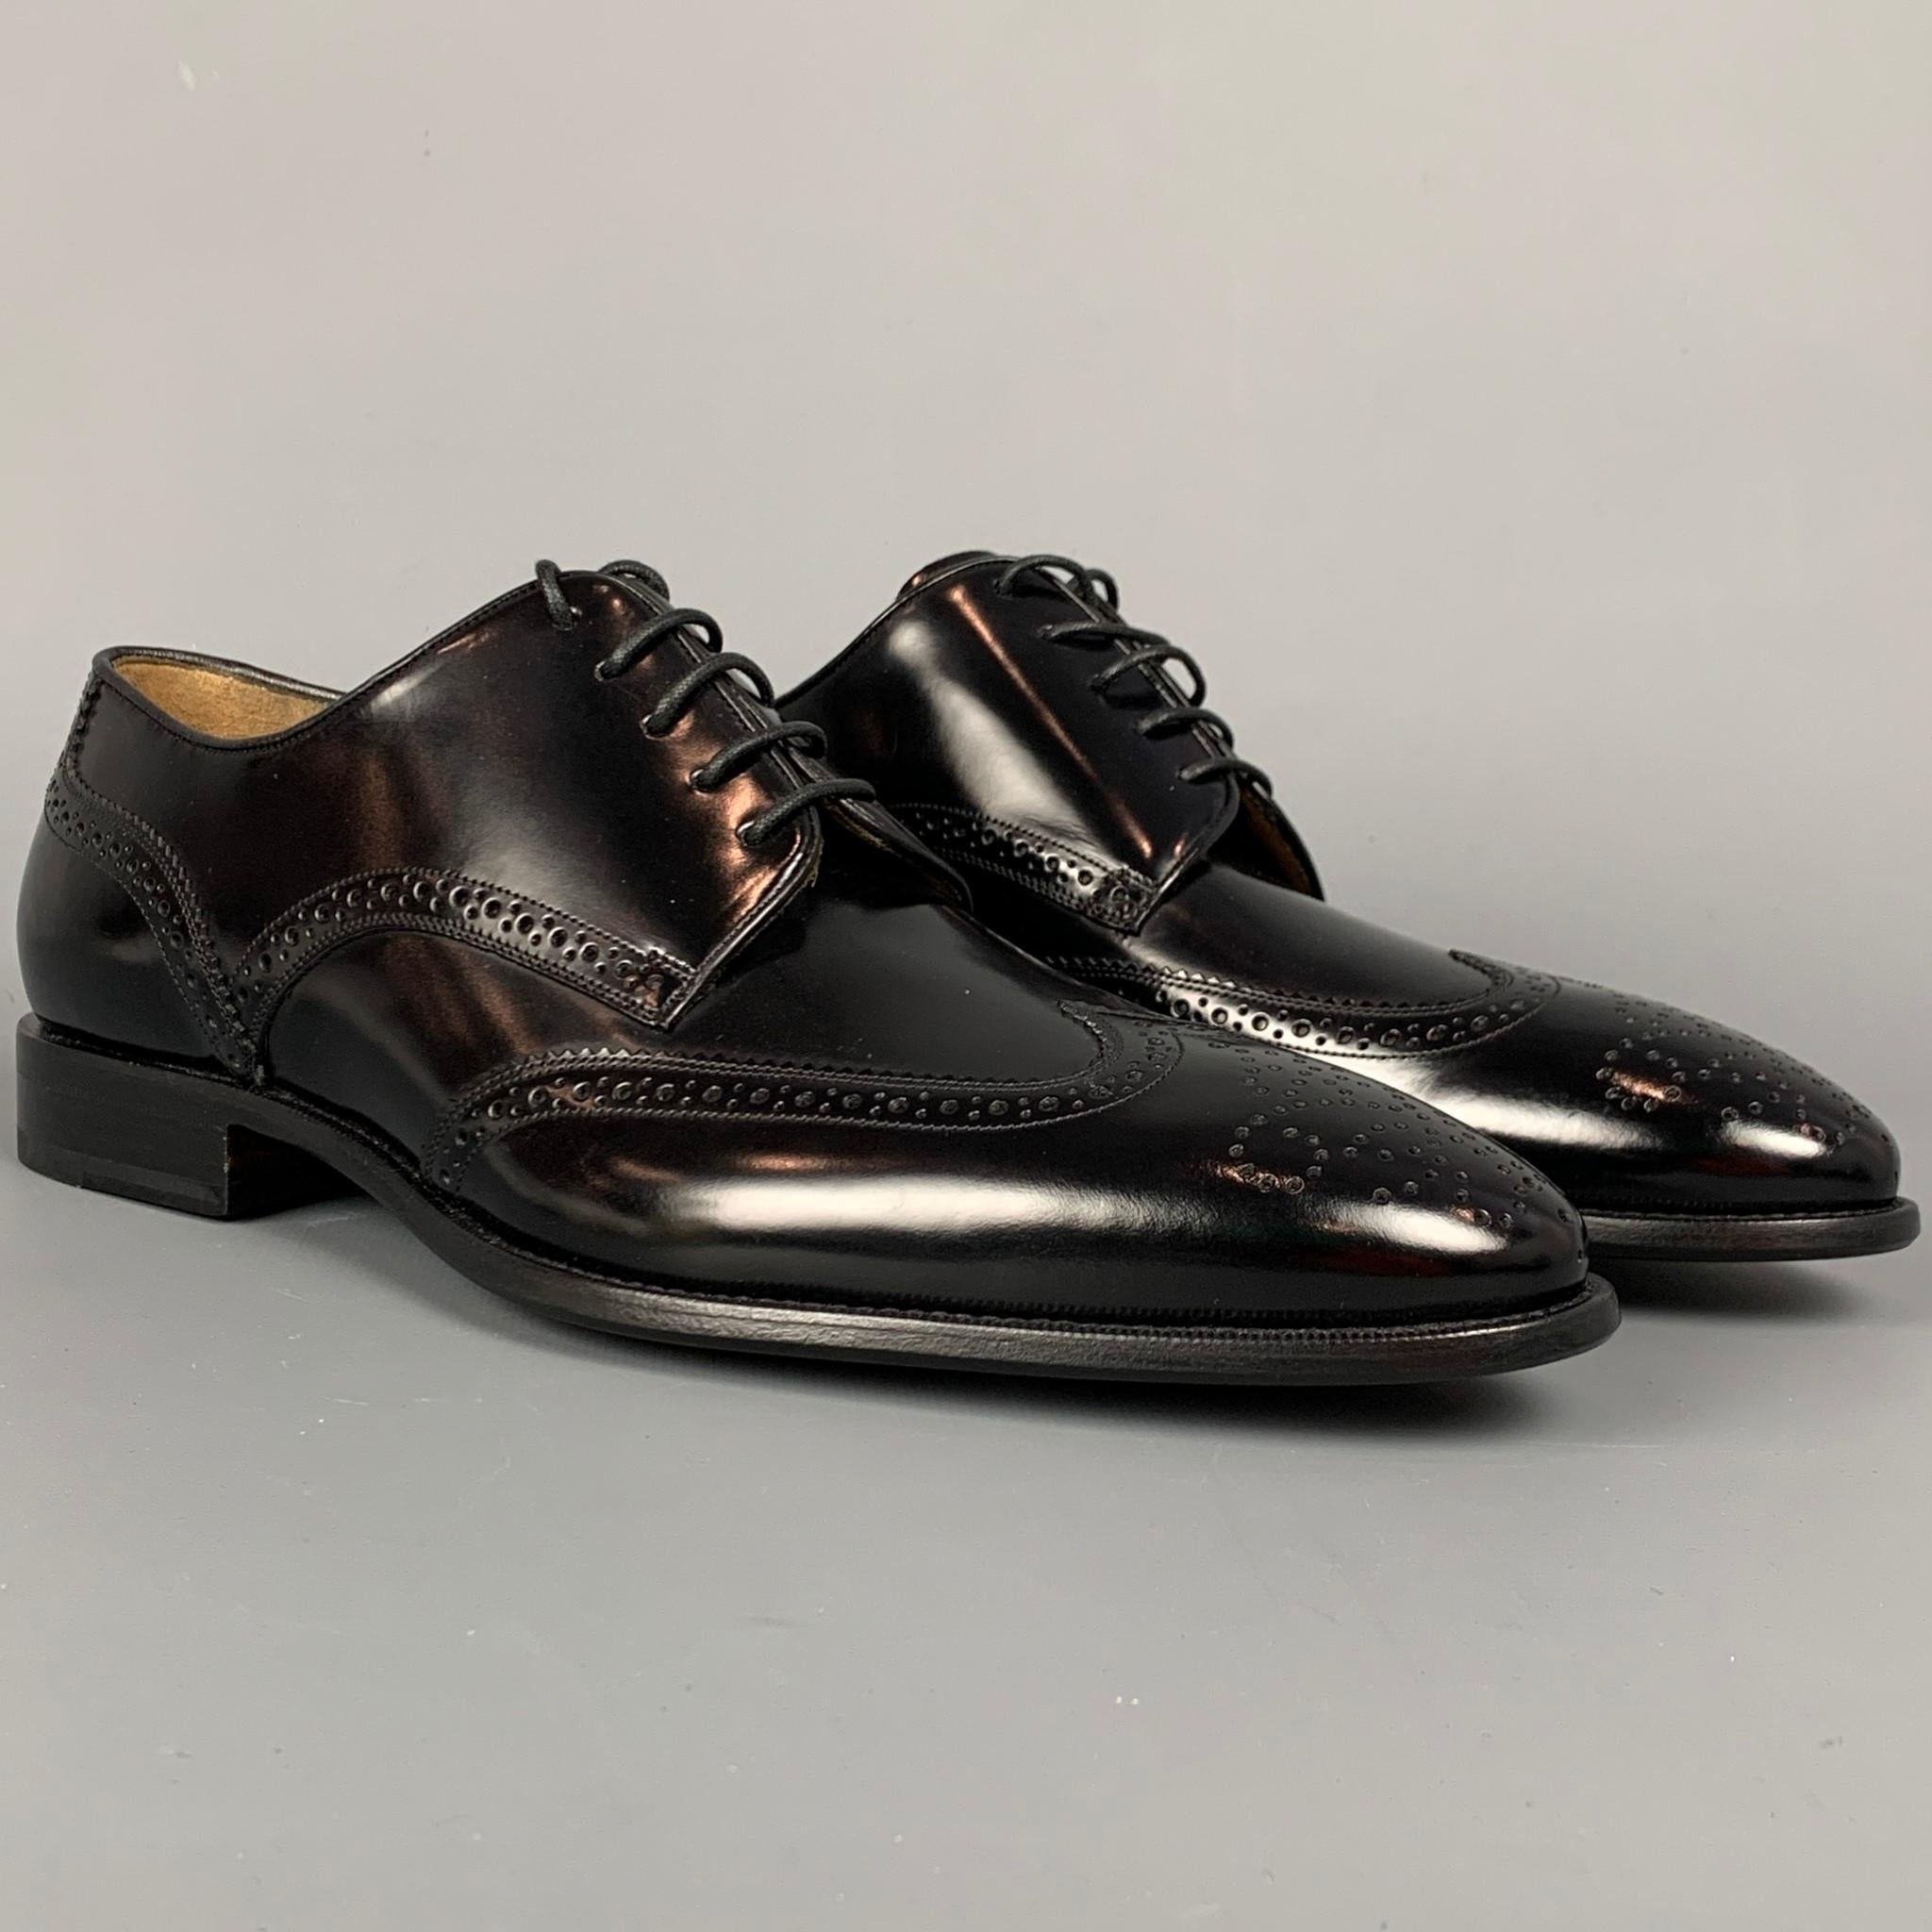 BALLY dress shoes comes in a black perforated leather featuring a wingtip style, wooden sole, and a lace up closure.

New With Box. 
Marked: EU 6 / US 7
Original Retail Price: $750.00

Outsole: 4 in. x 11.5 in. 